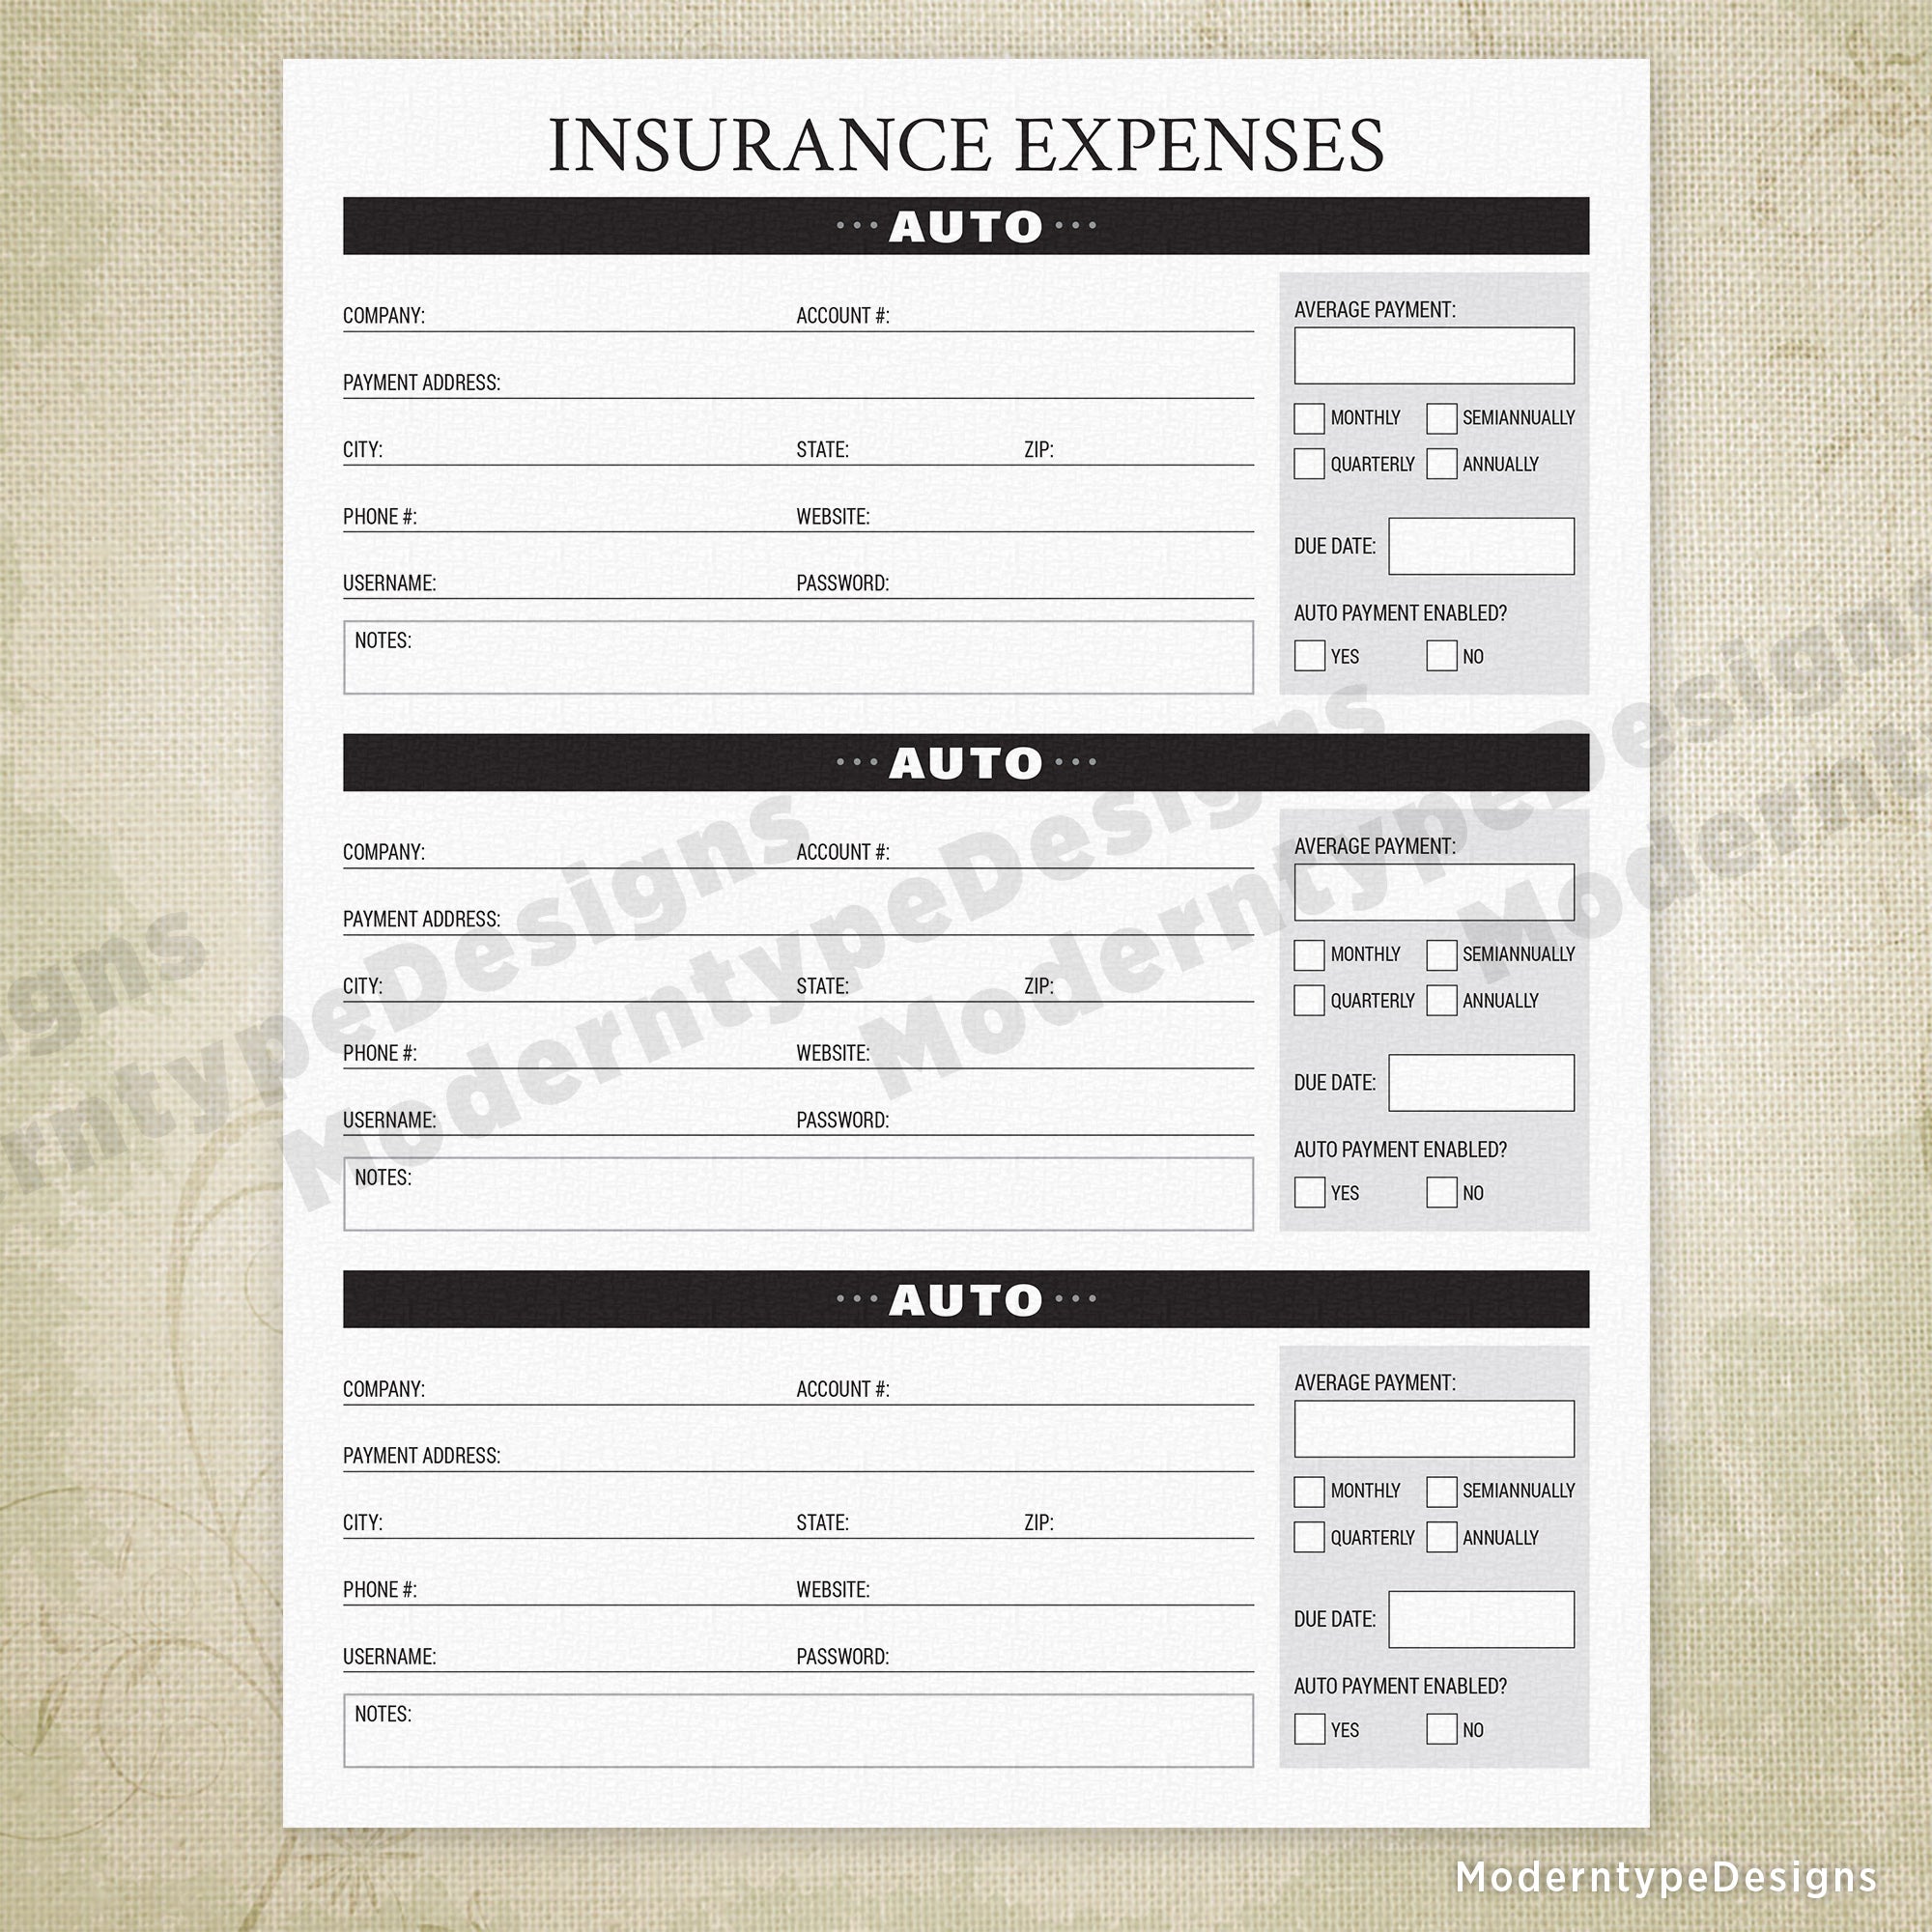 Insurance Expenses Printable - End of Life